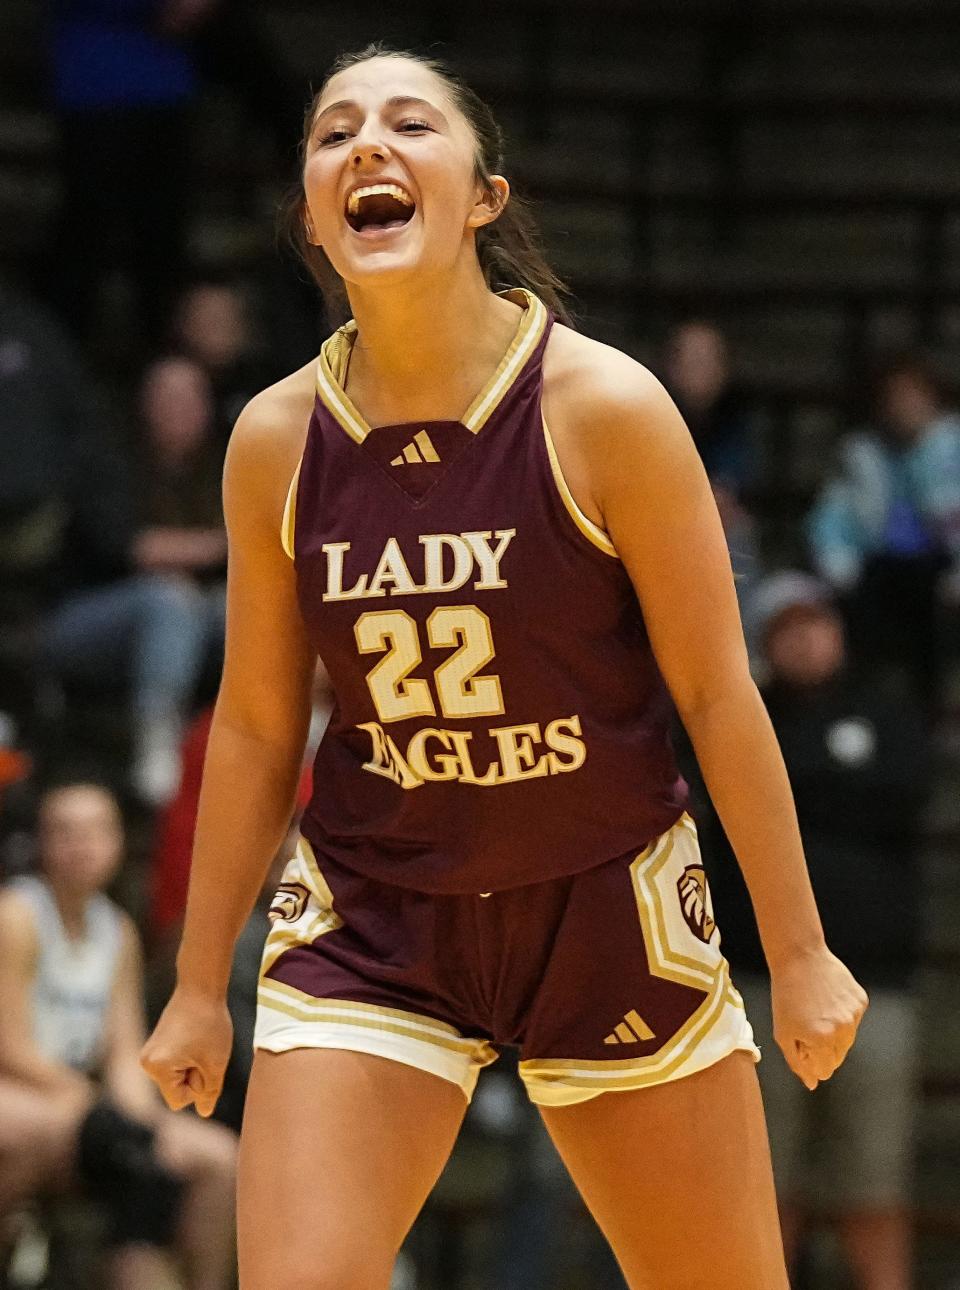 Columbia City Eagles guard Tessa Tonkel (22) yells in excitement Thursday, Oct. 5, 2023, during the Hall of Fame Classic girls basketball tournament at New Castle Fieldhouse in New Castle. The Columbia City Eagles defeated the Jennings County Panthers, 56-47.